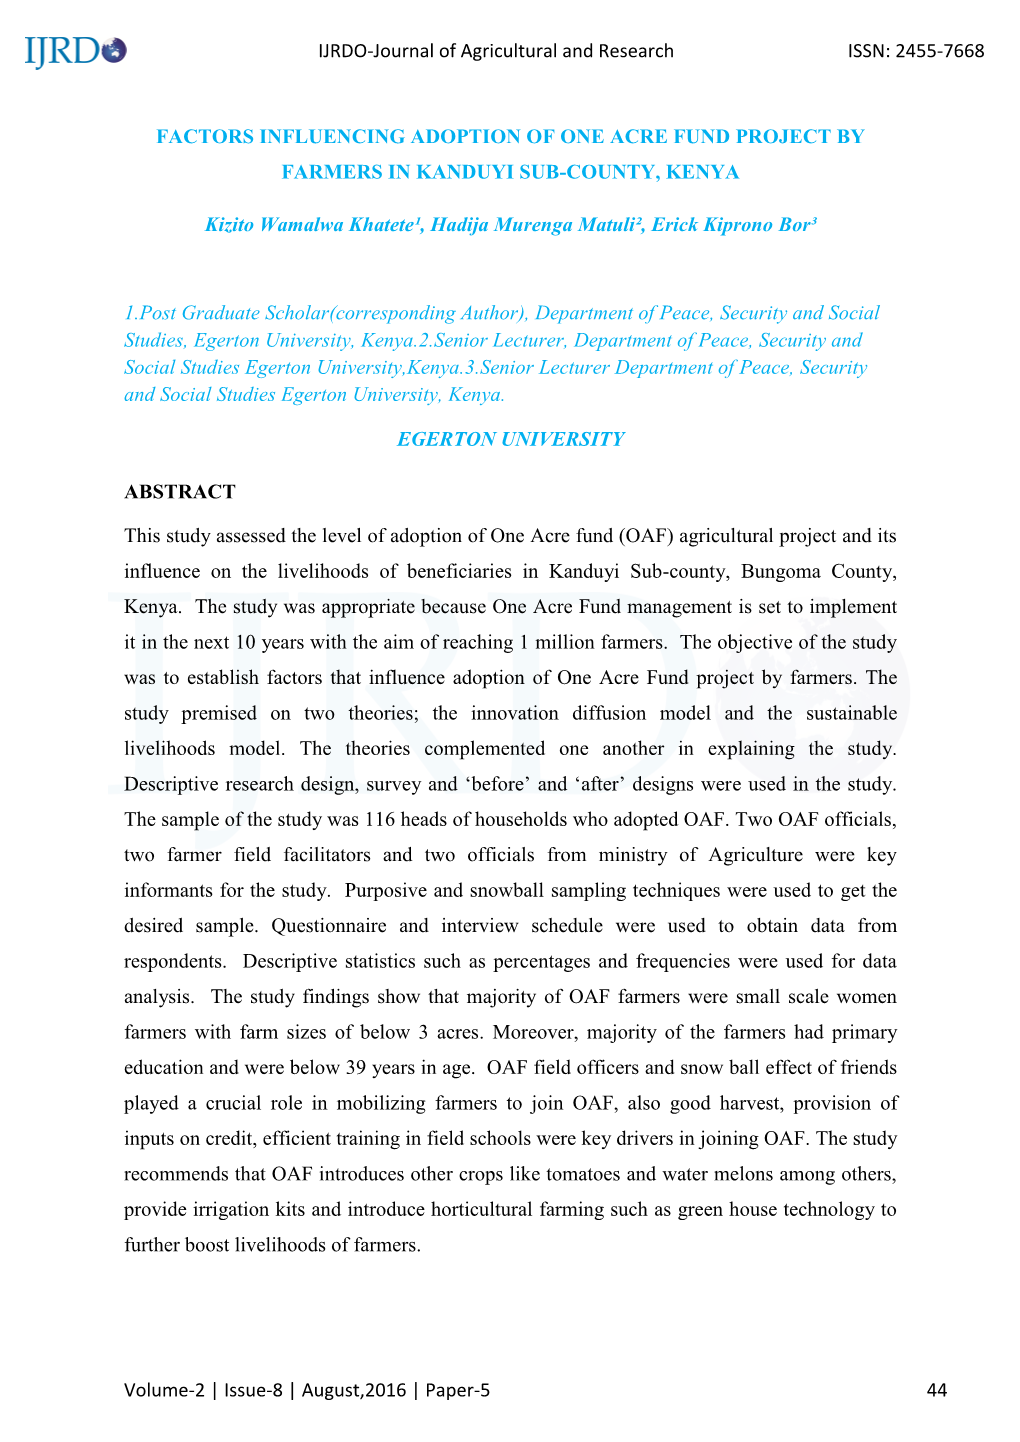 Factors Influencing Adoption of One Acre Fund Project by Farmers in Kanduyi Sub-County, Kenya